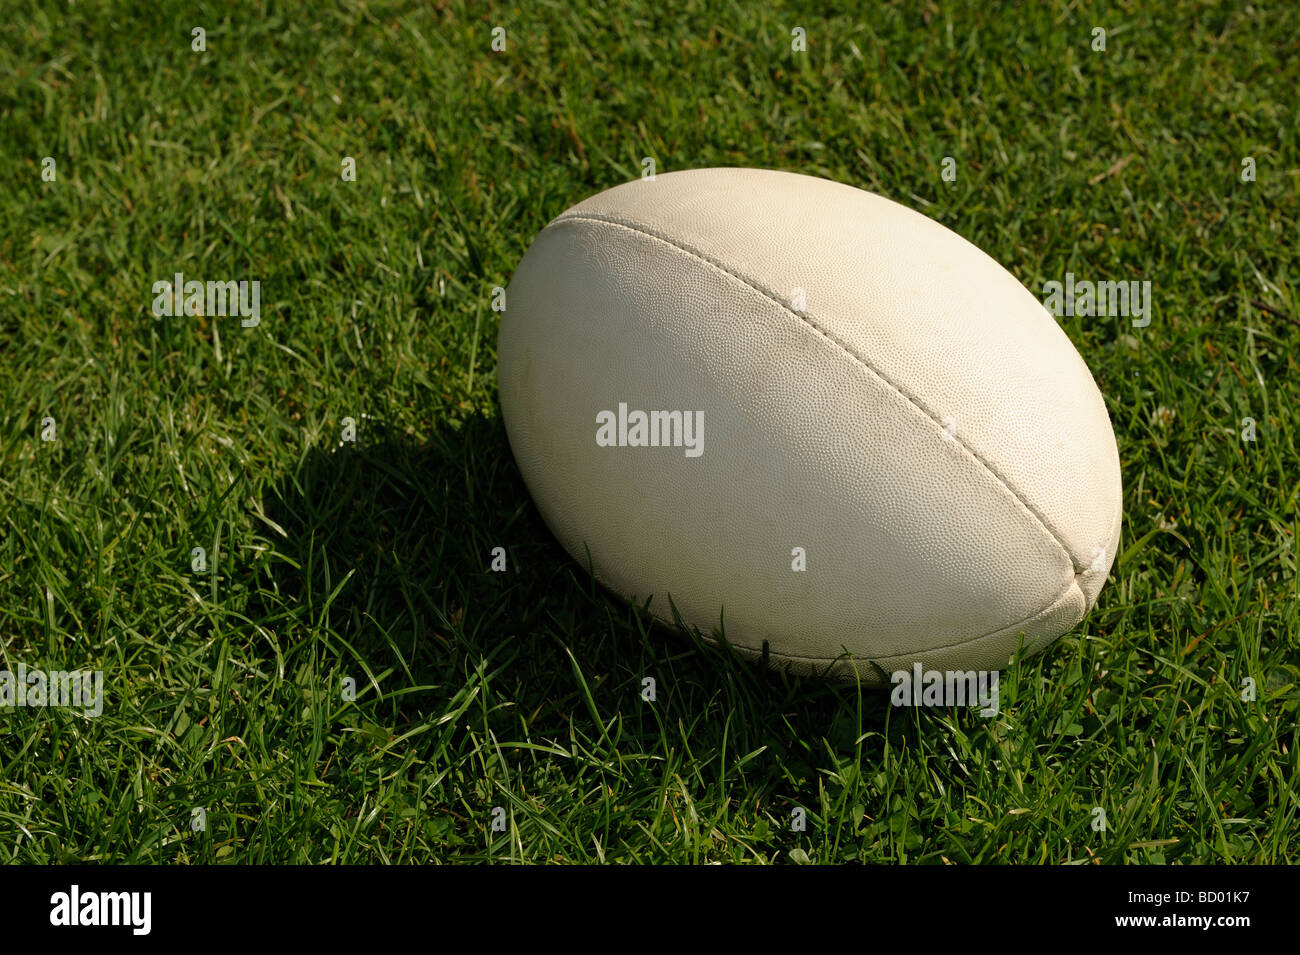 Rugby-ball Stockfoto